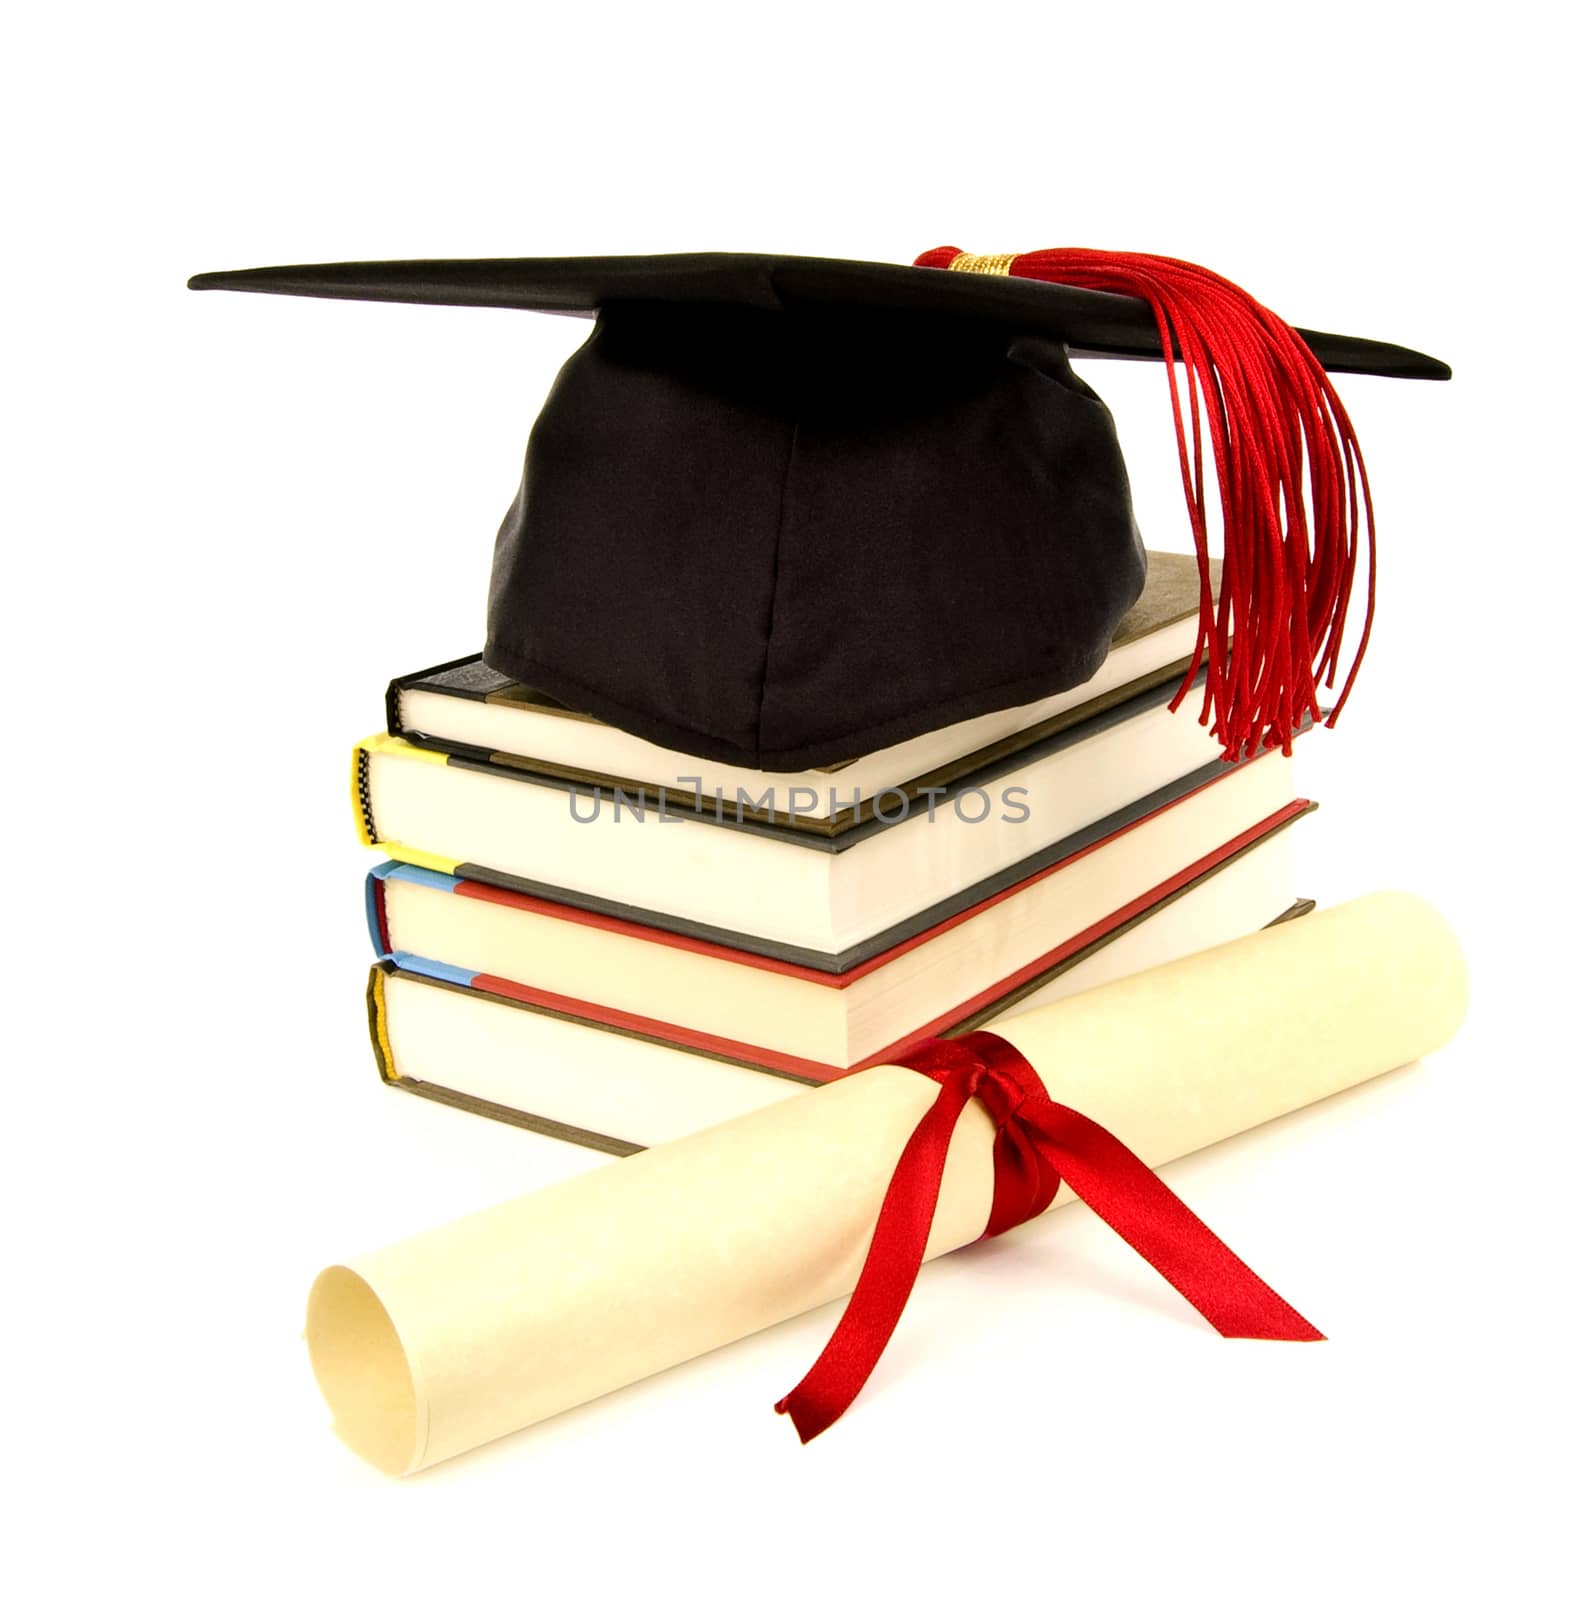 Graduation cap with red tassel, stack of books and diploma on white background